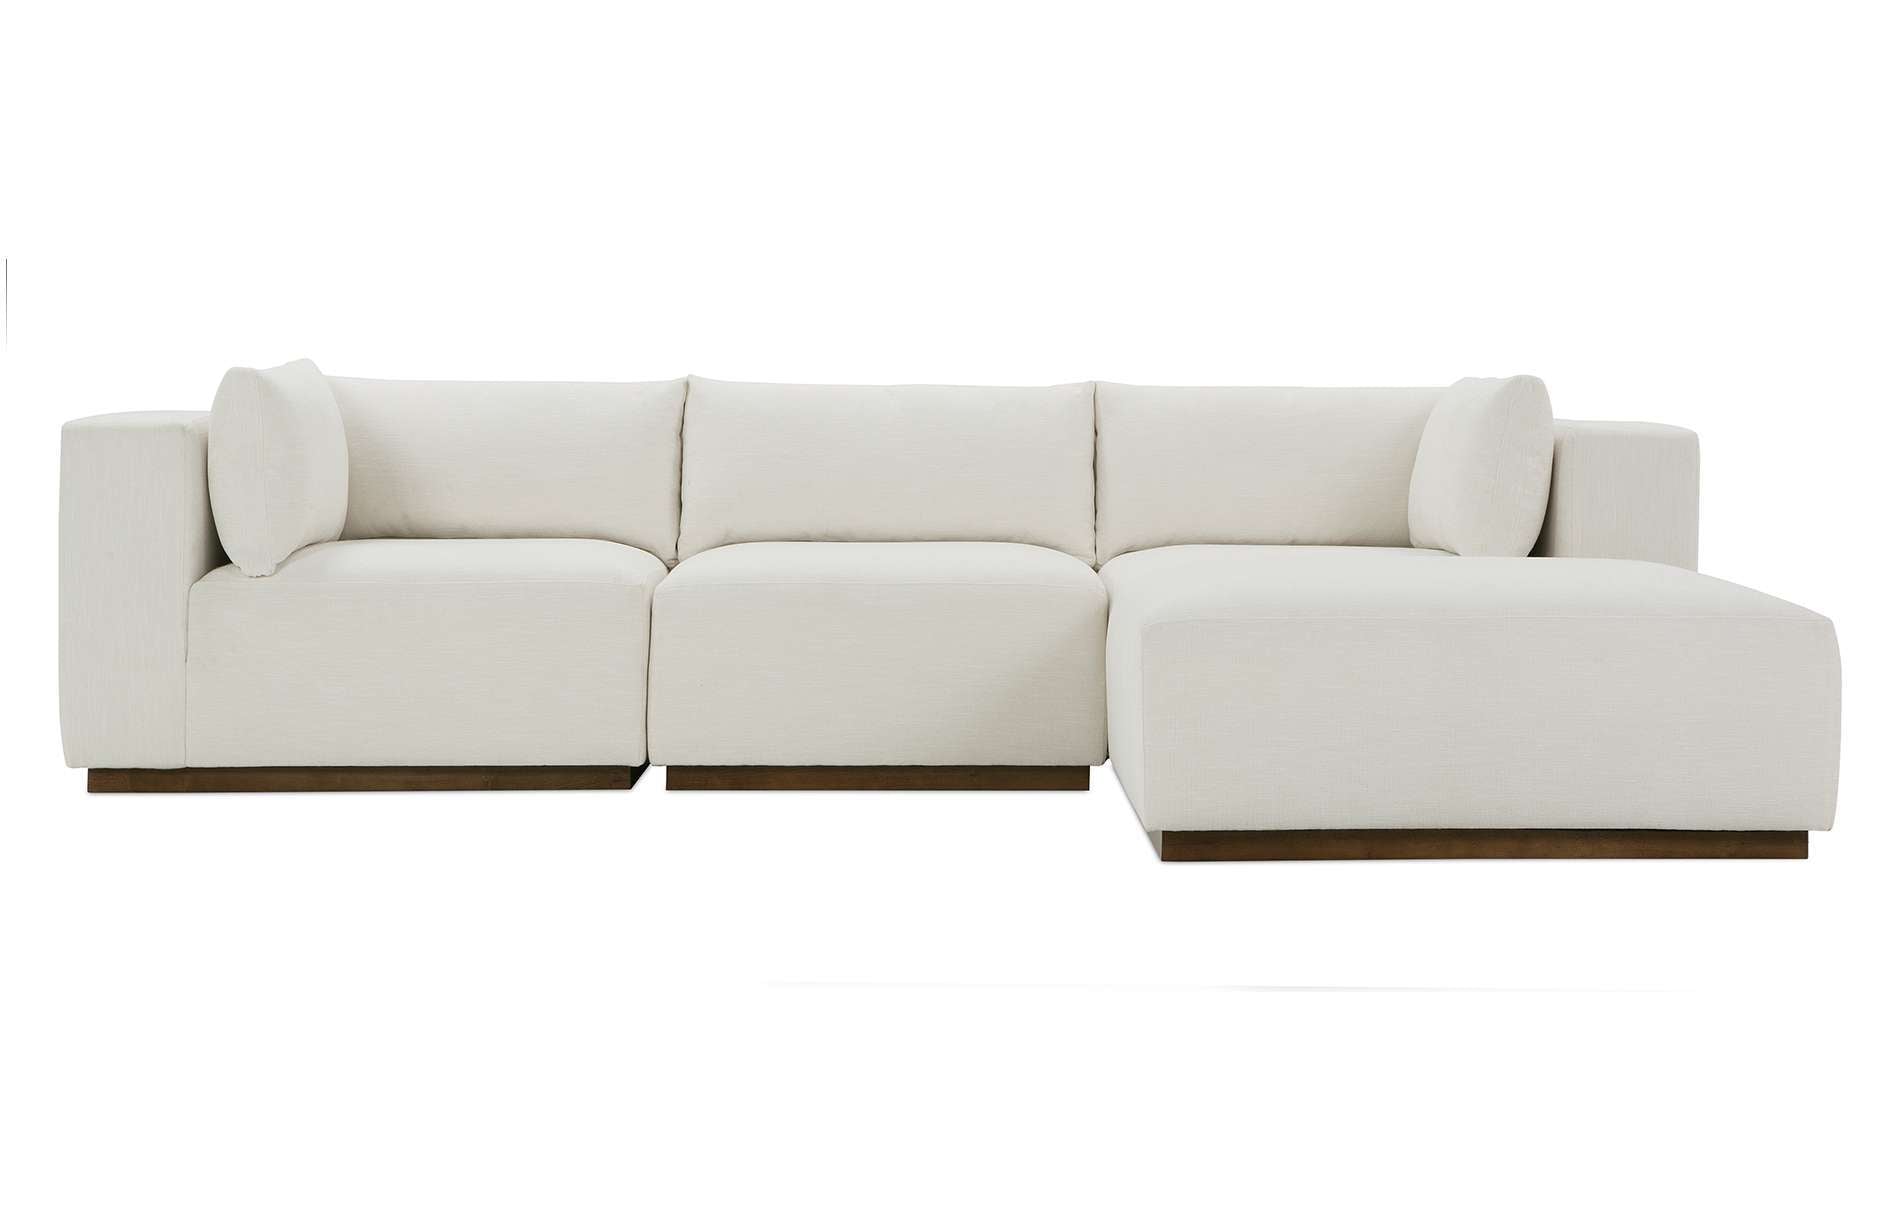 Massive sectional featuring an extra deep seat with crowned